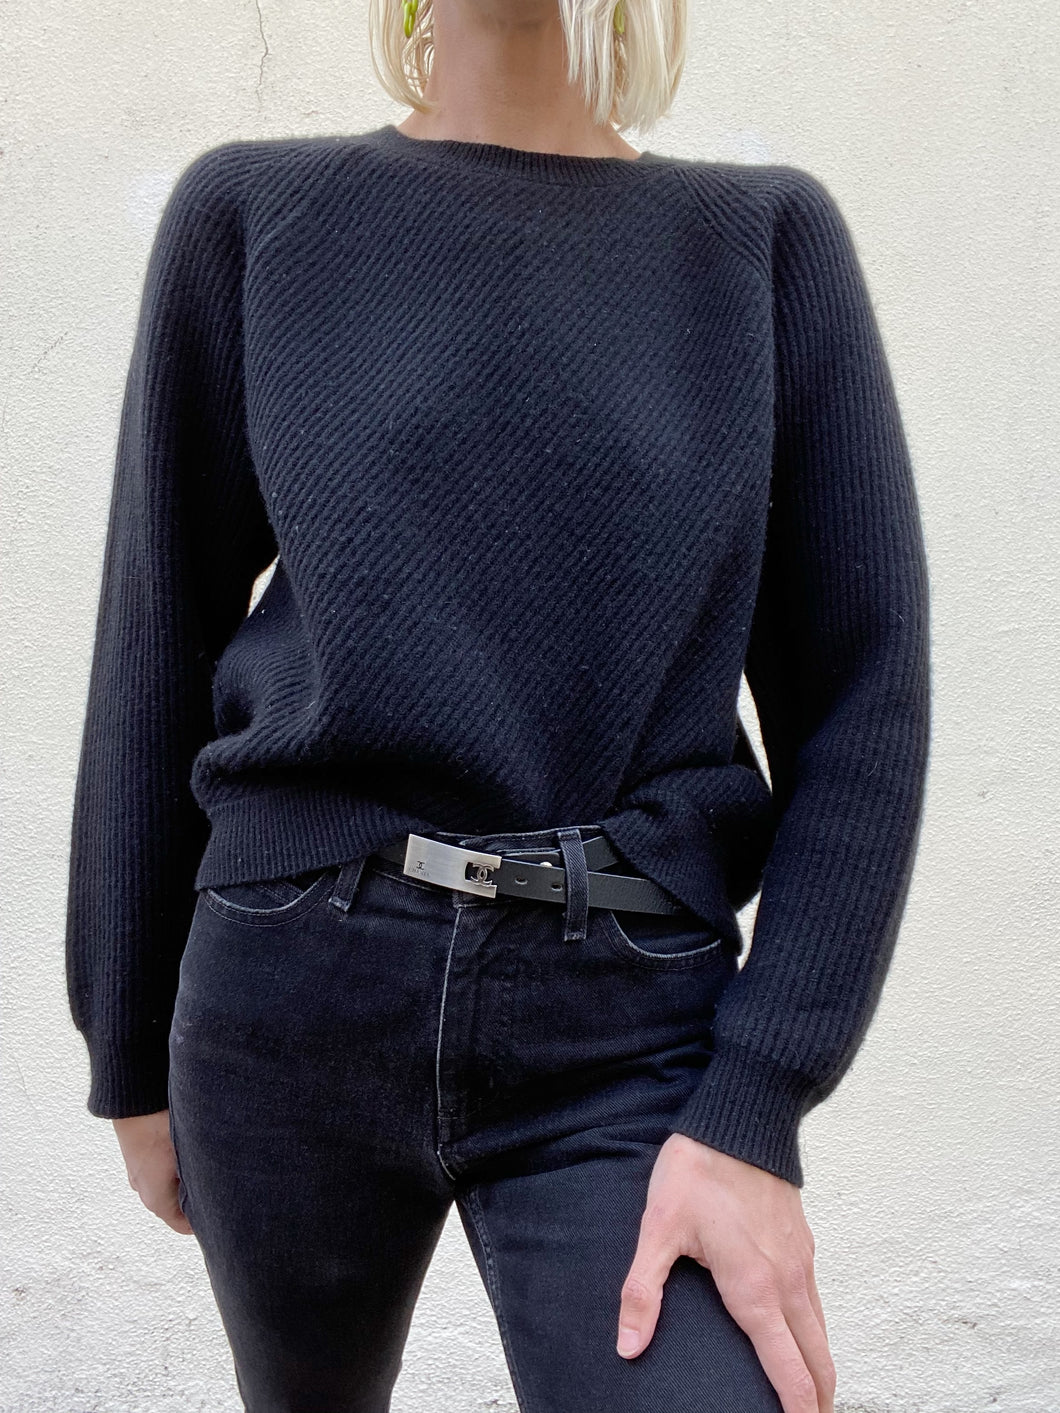 Vince Cashmere Black Sweater - The Curatorial Dept.